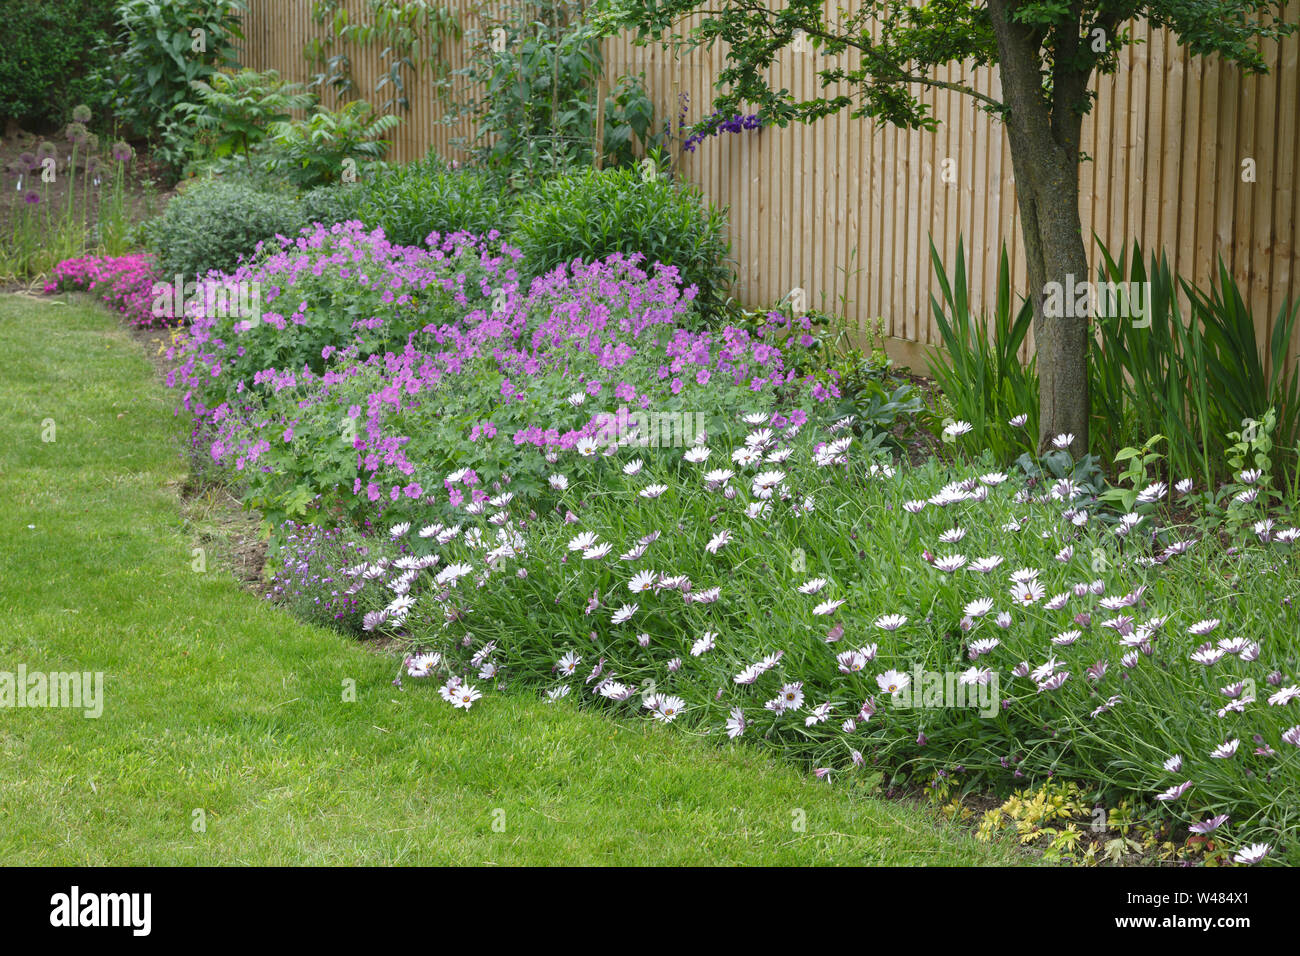 Garden flower bed (flowerbed) with cape daisies and geraniums in a typical English garden Stock Photo